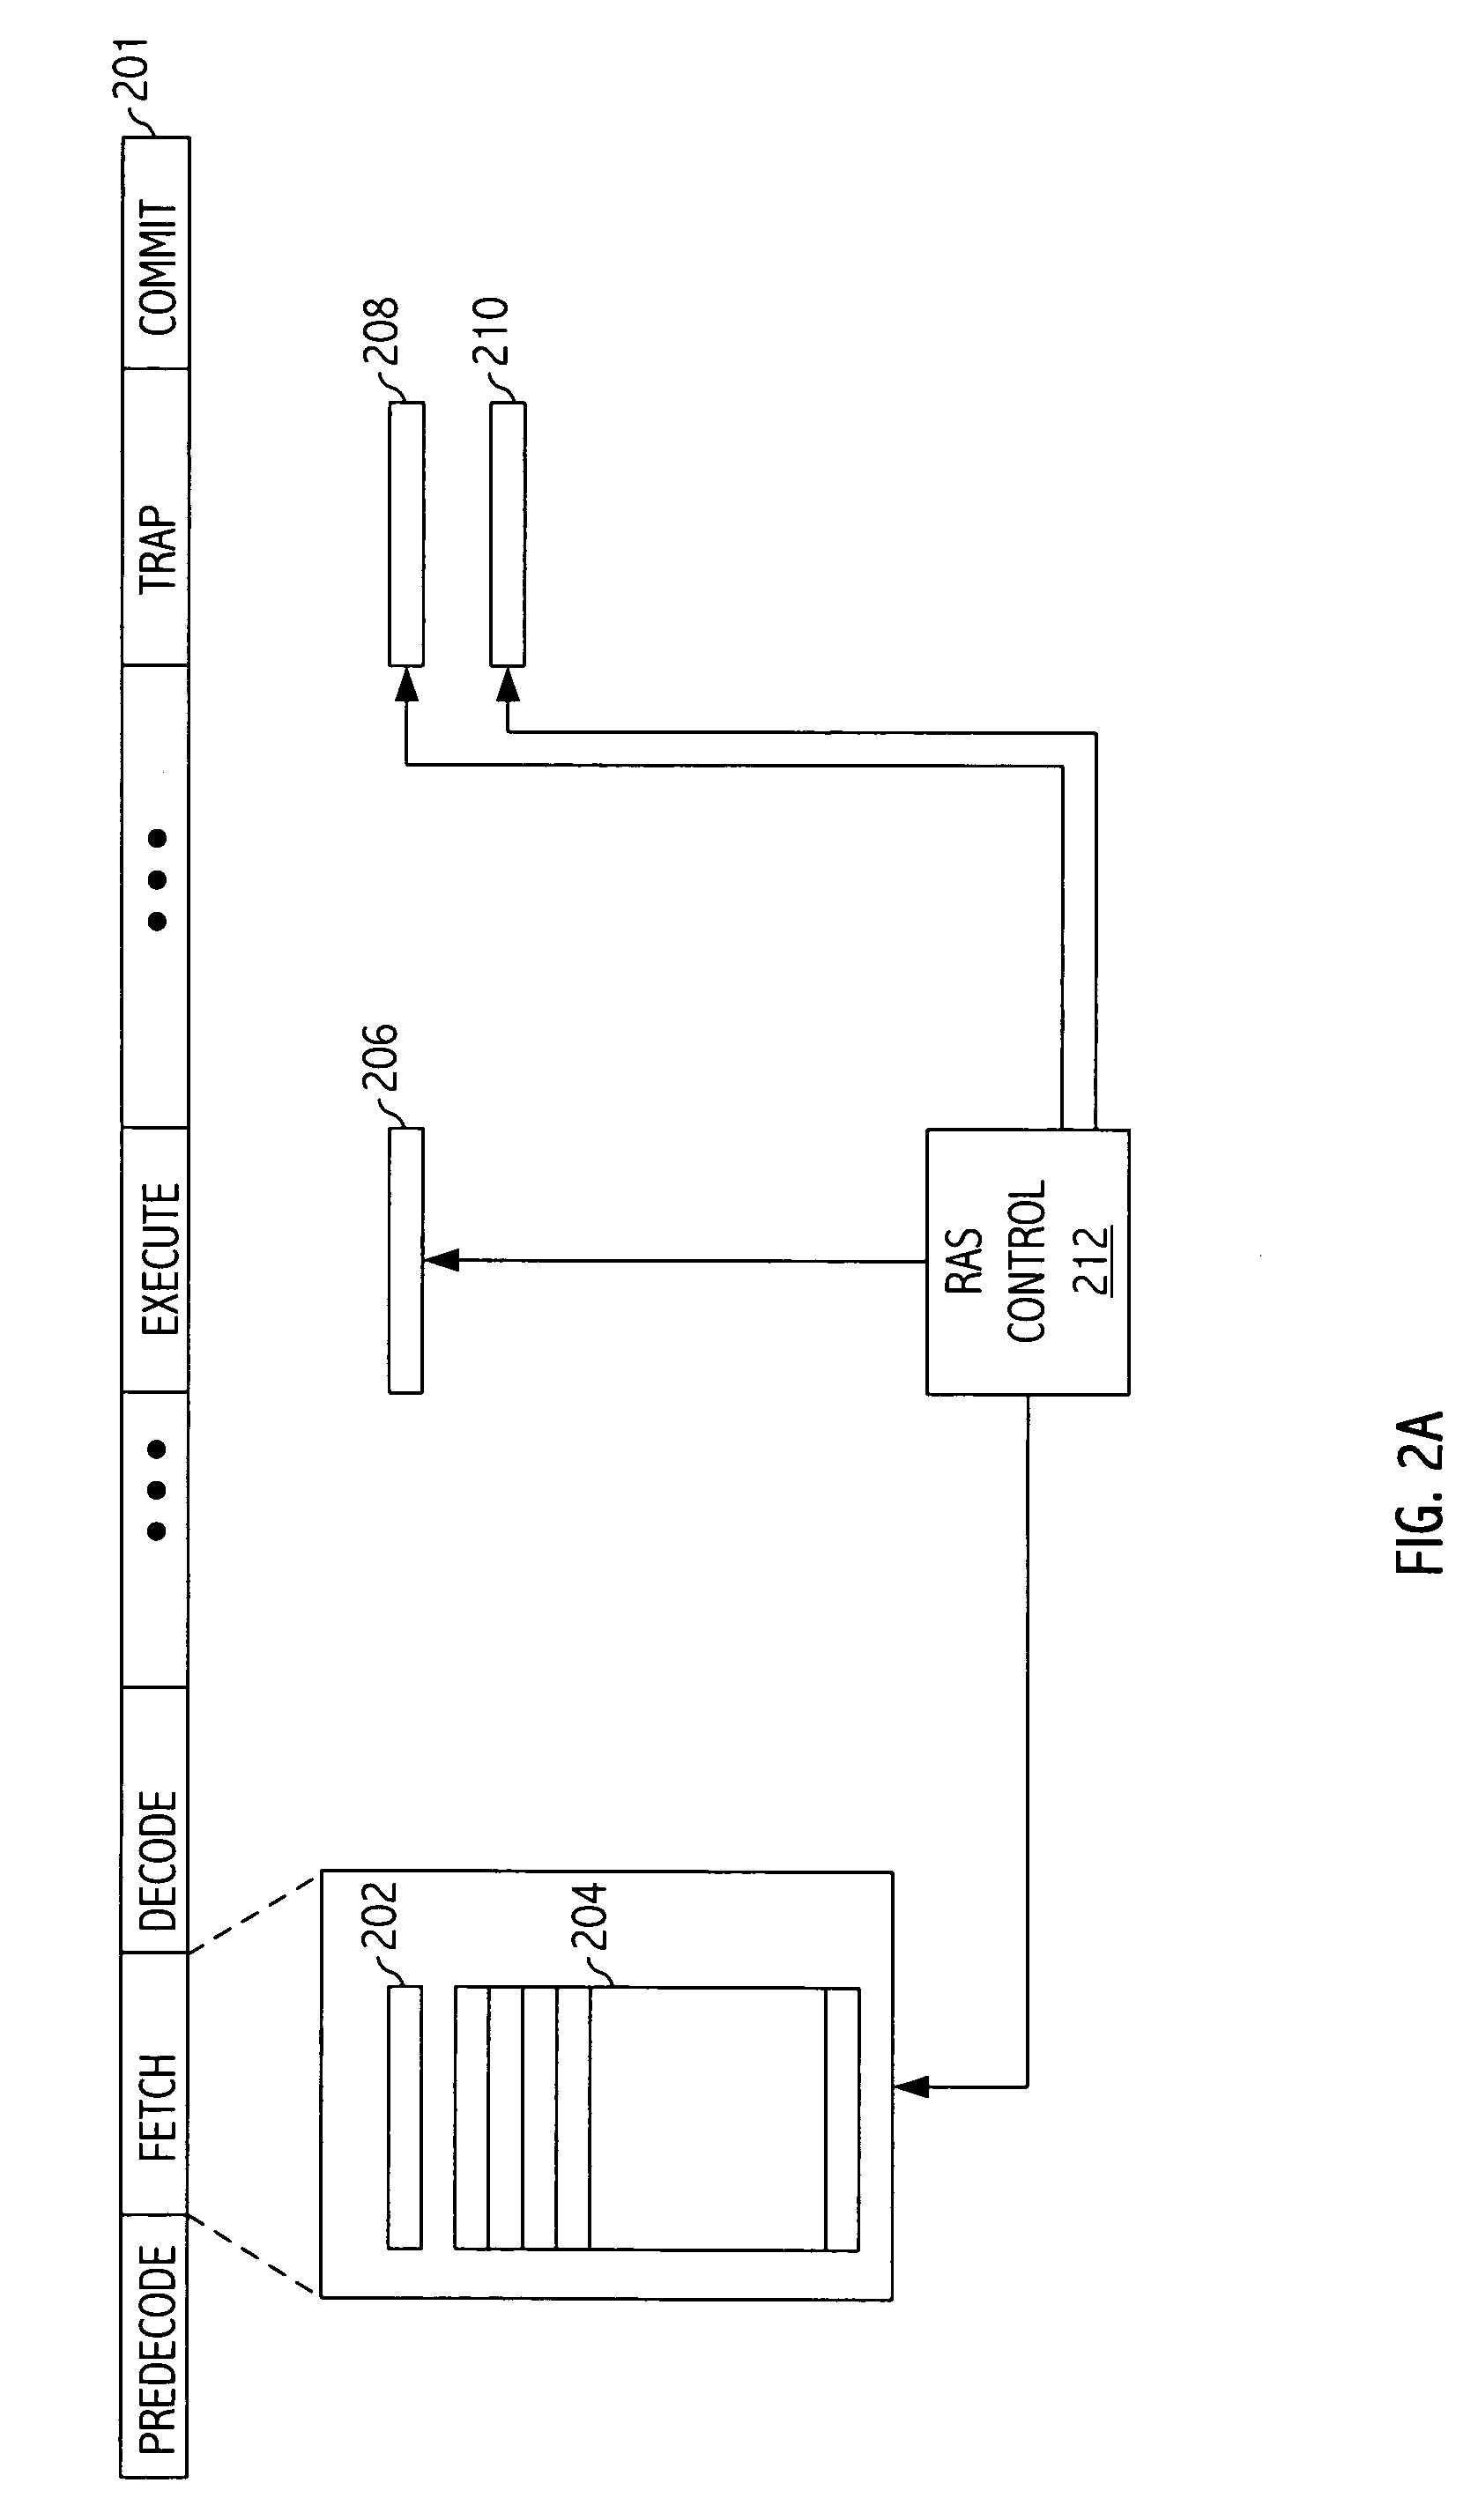 Mechanism for hardware tracking of return address after tail call elimination of return-type instruction